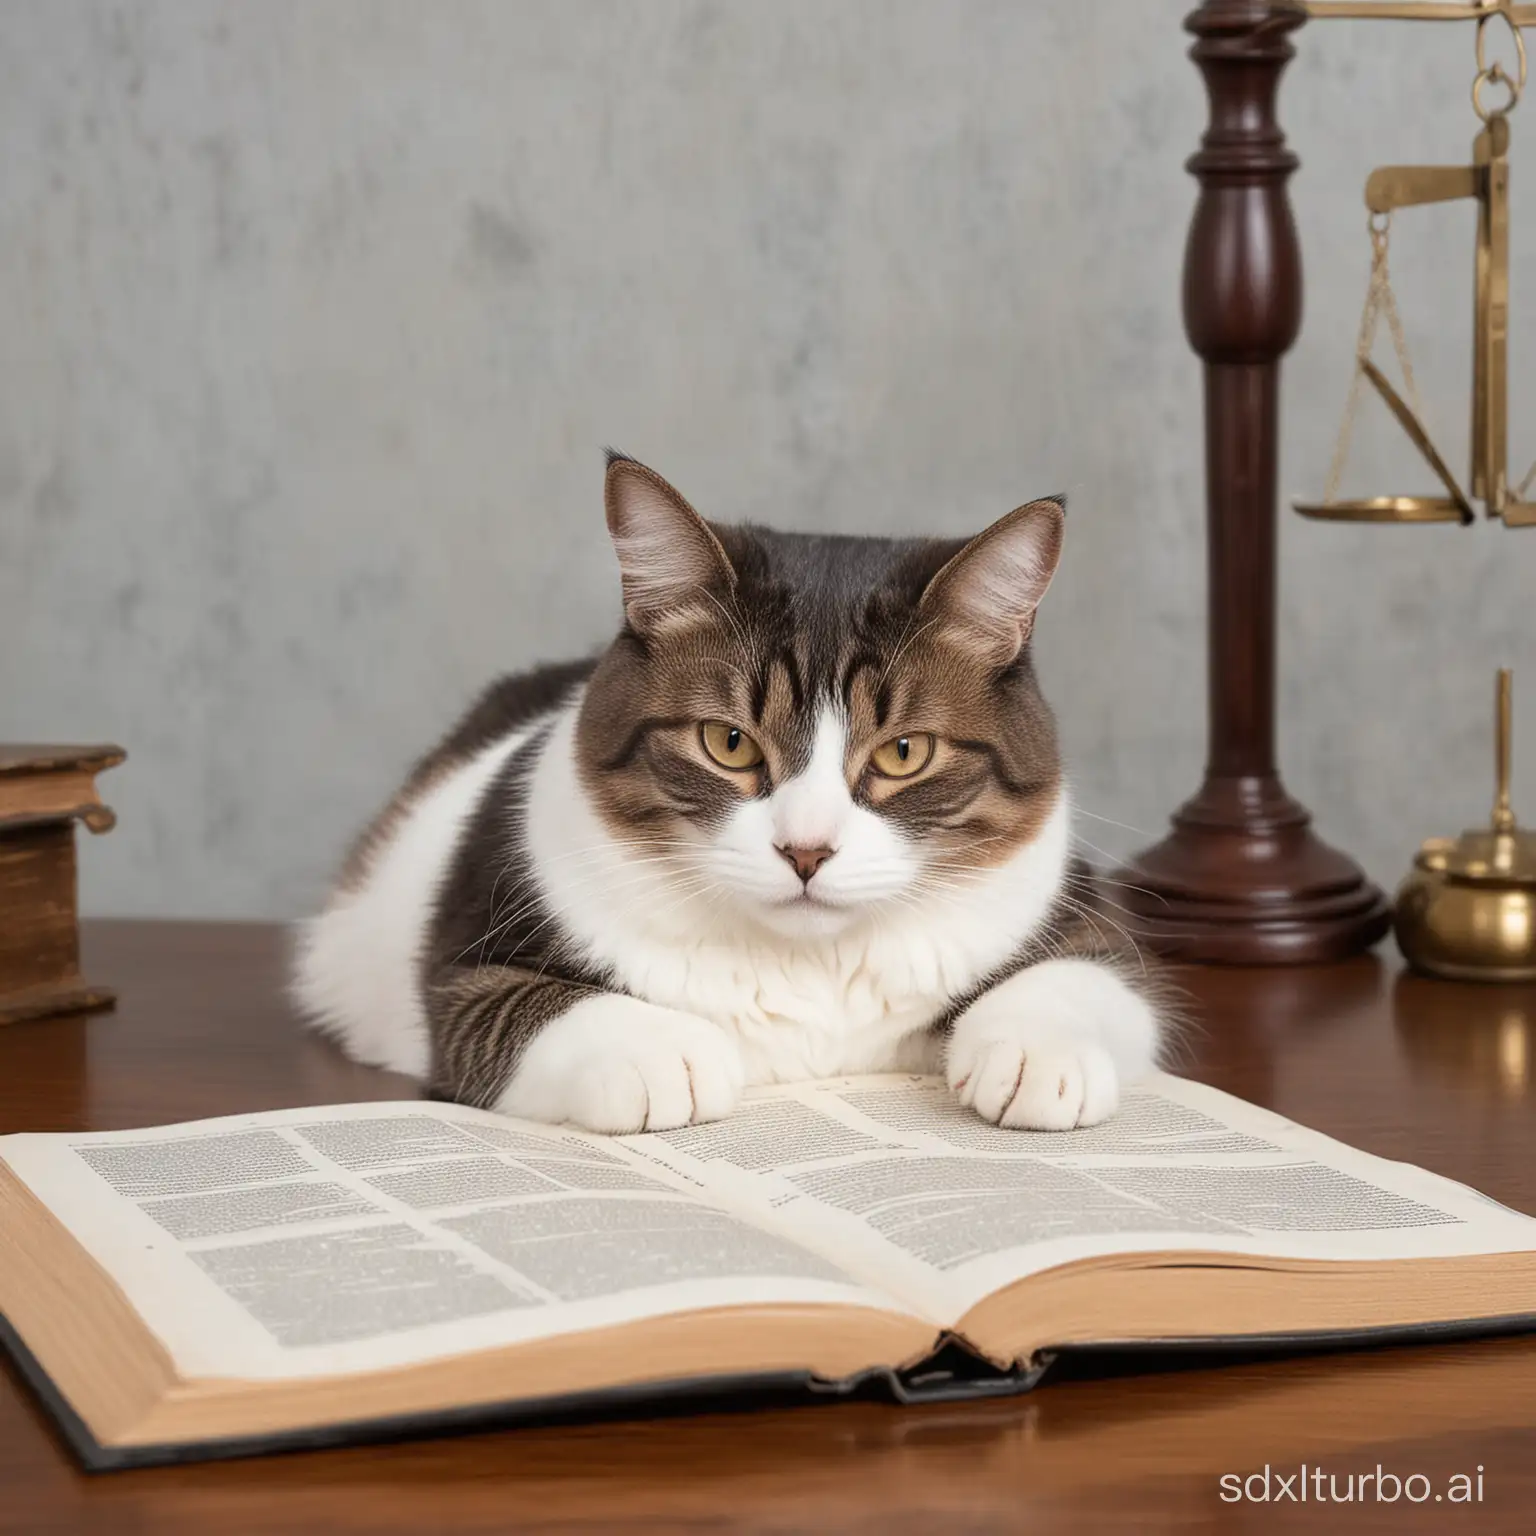 a cat learnig laws